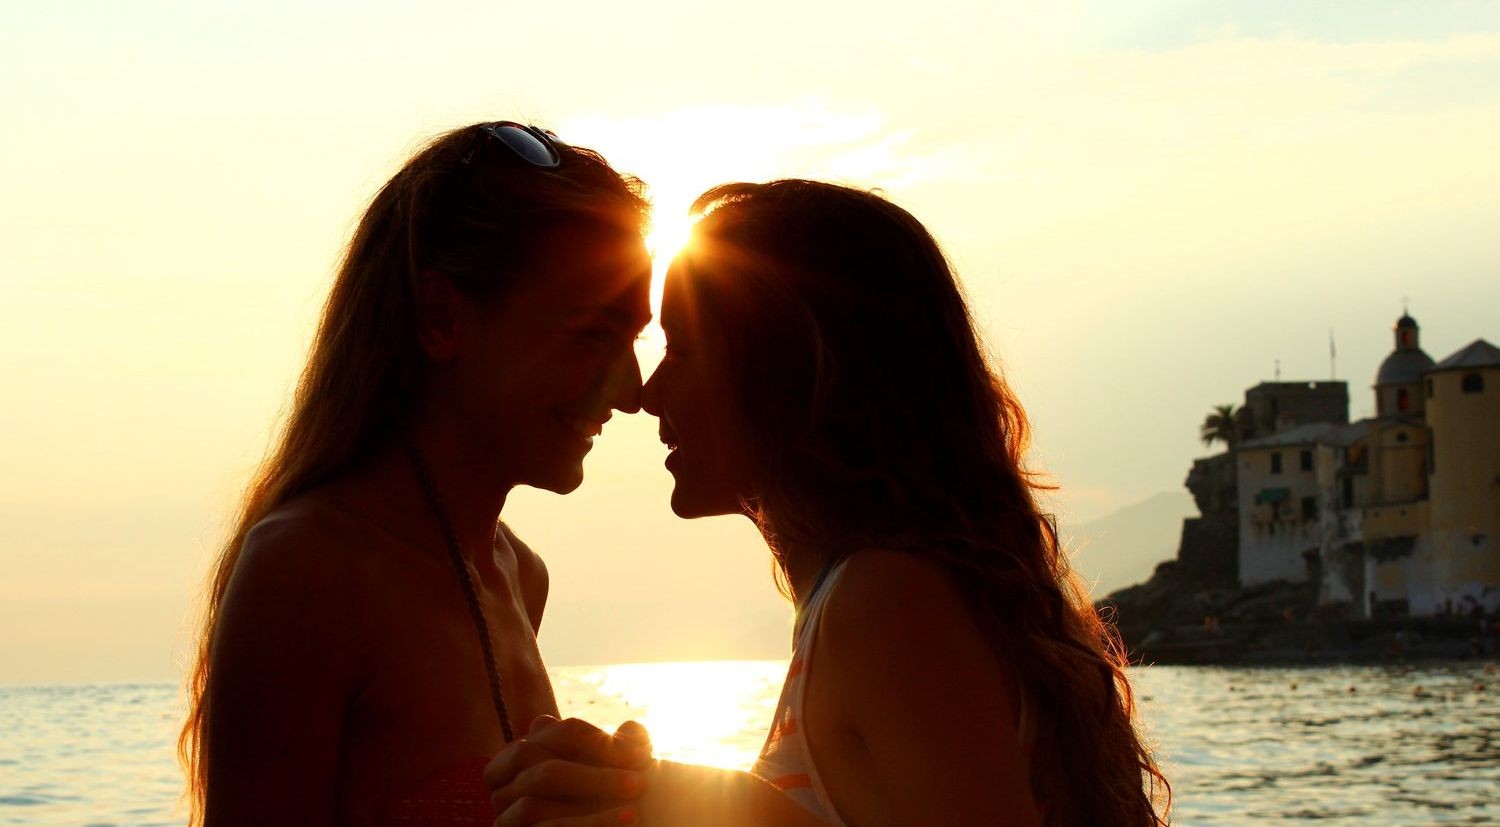 Pretty Naked Beach Lesbians - Women are either bisexual or gay but 'never straight' psychologist suggests  | Independent.ie